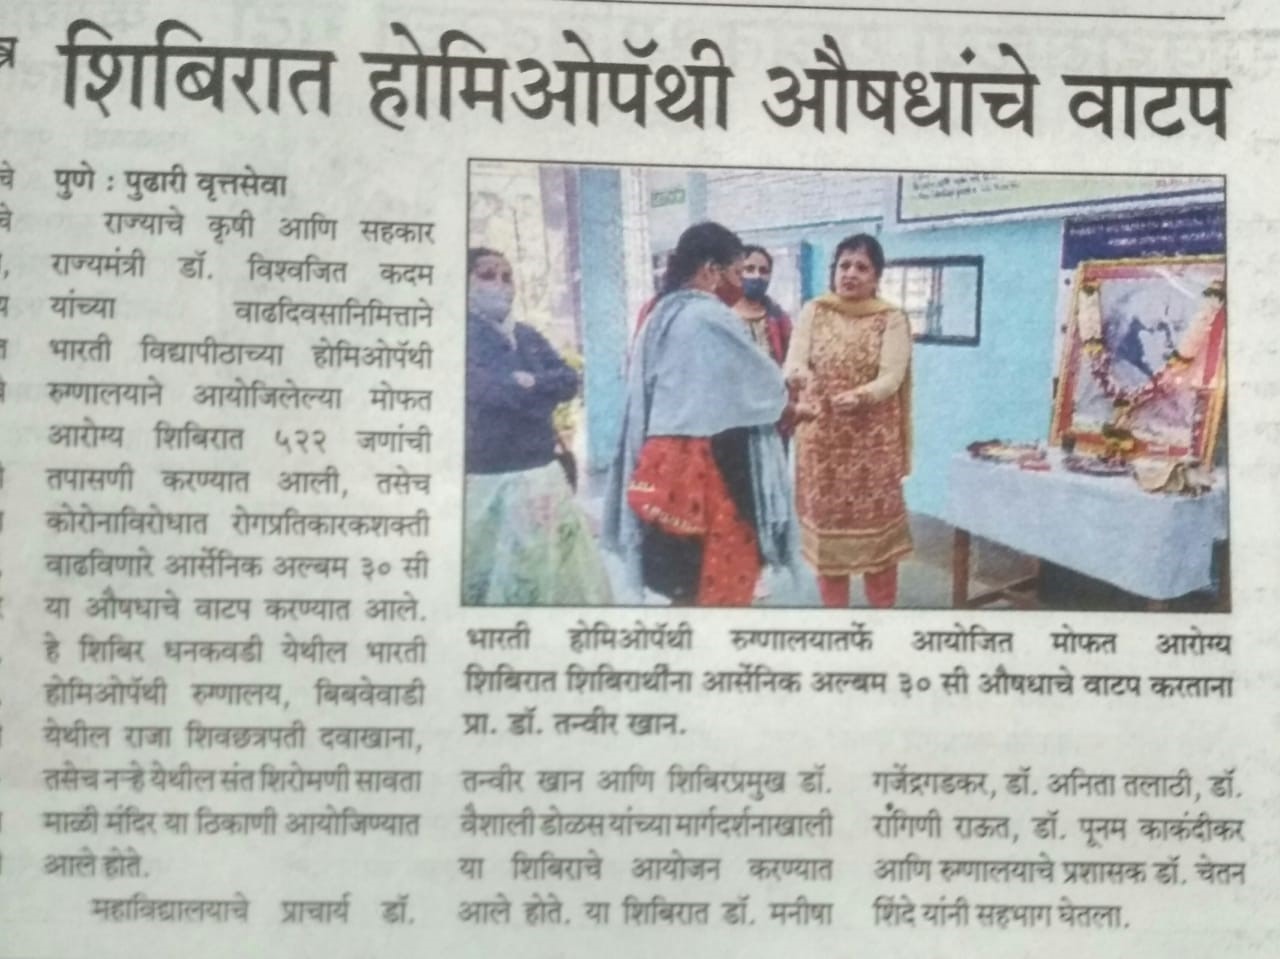 General Health Camp conducted 